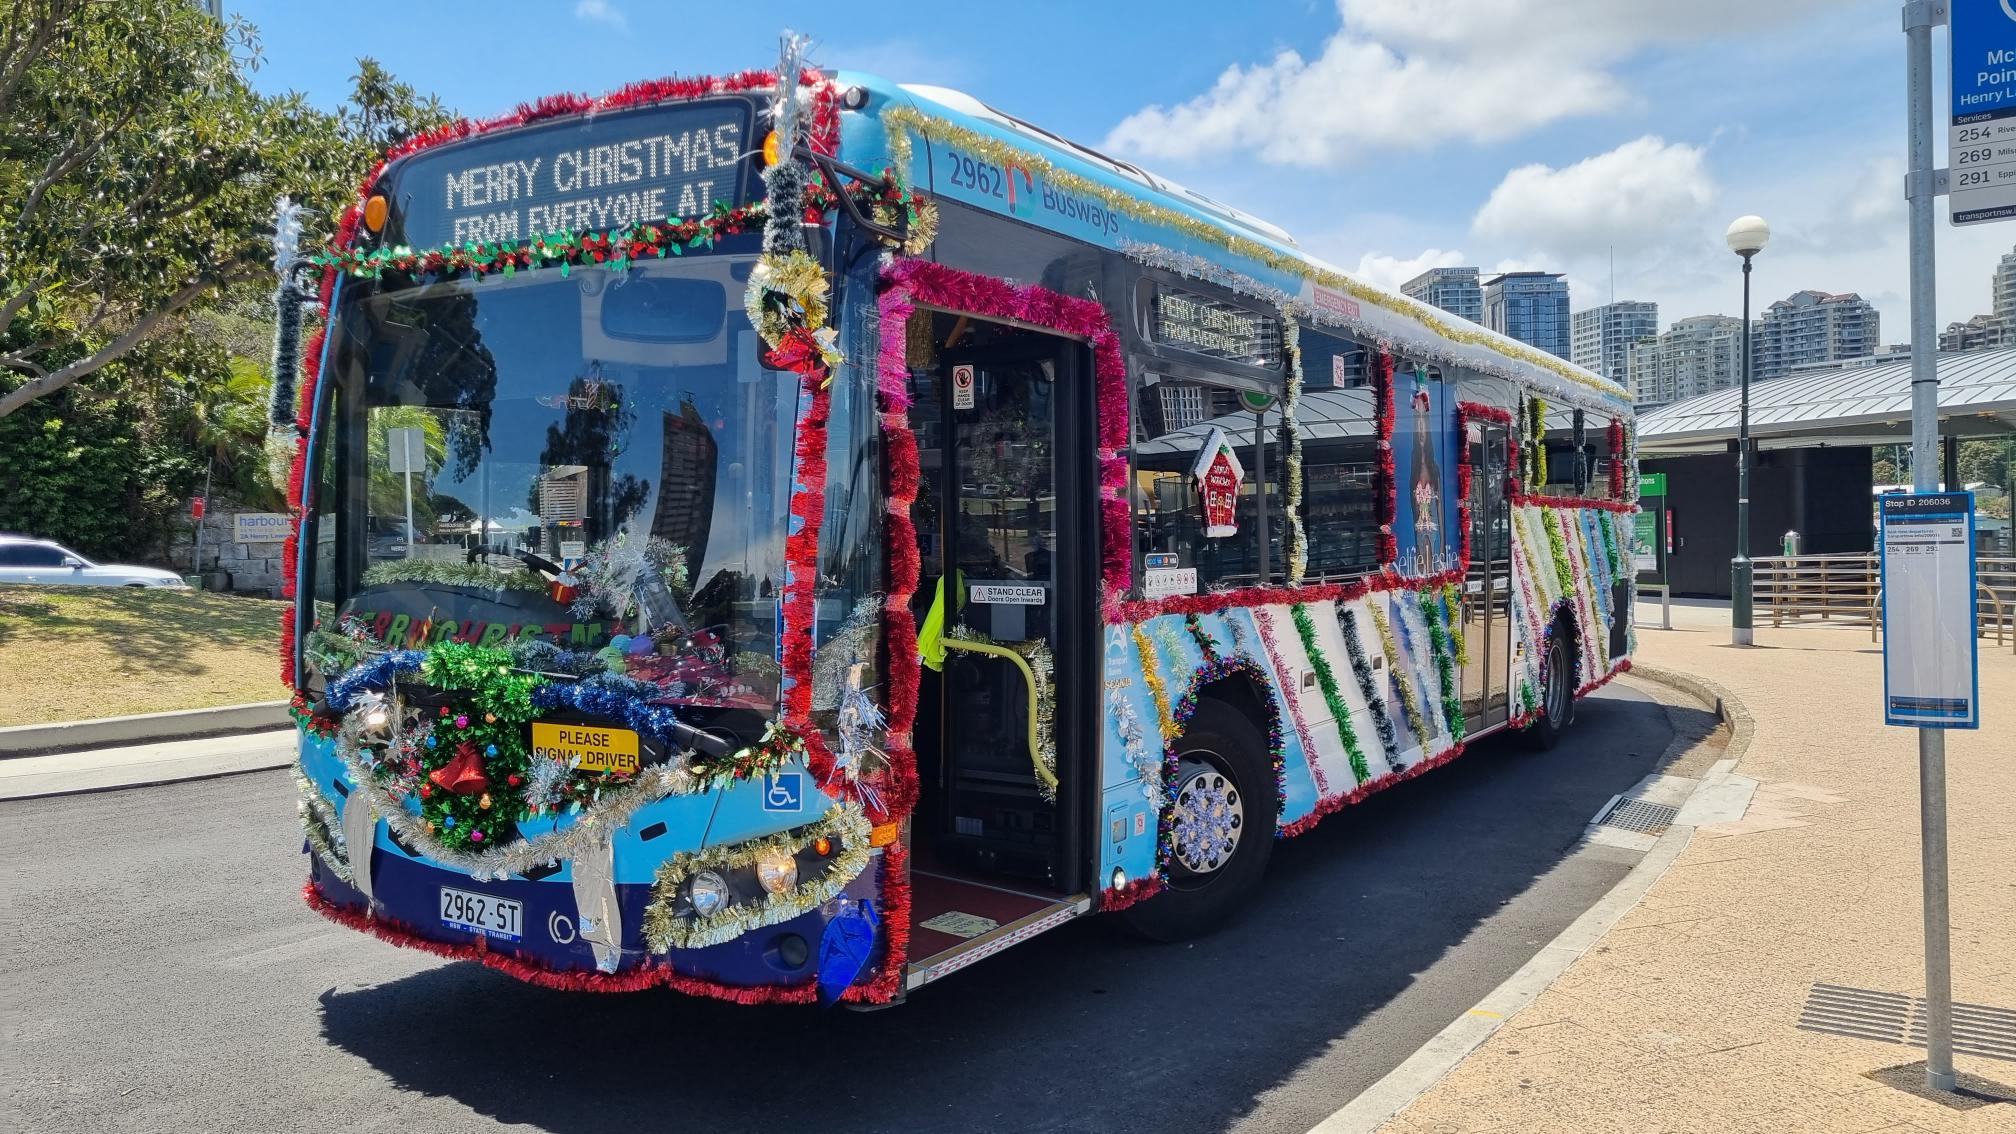 Willoughby Christmas bus decorated externally 